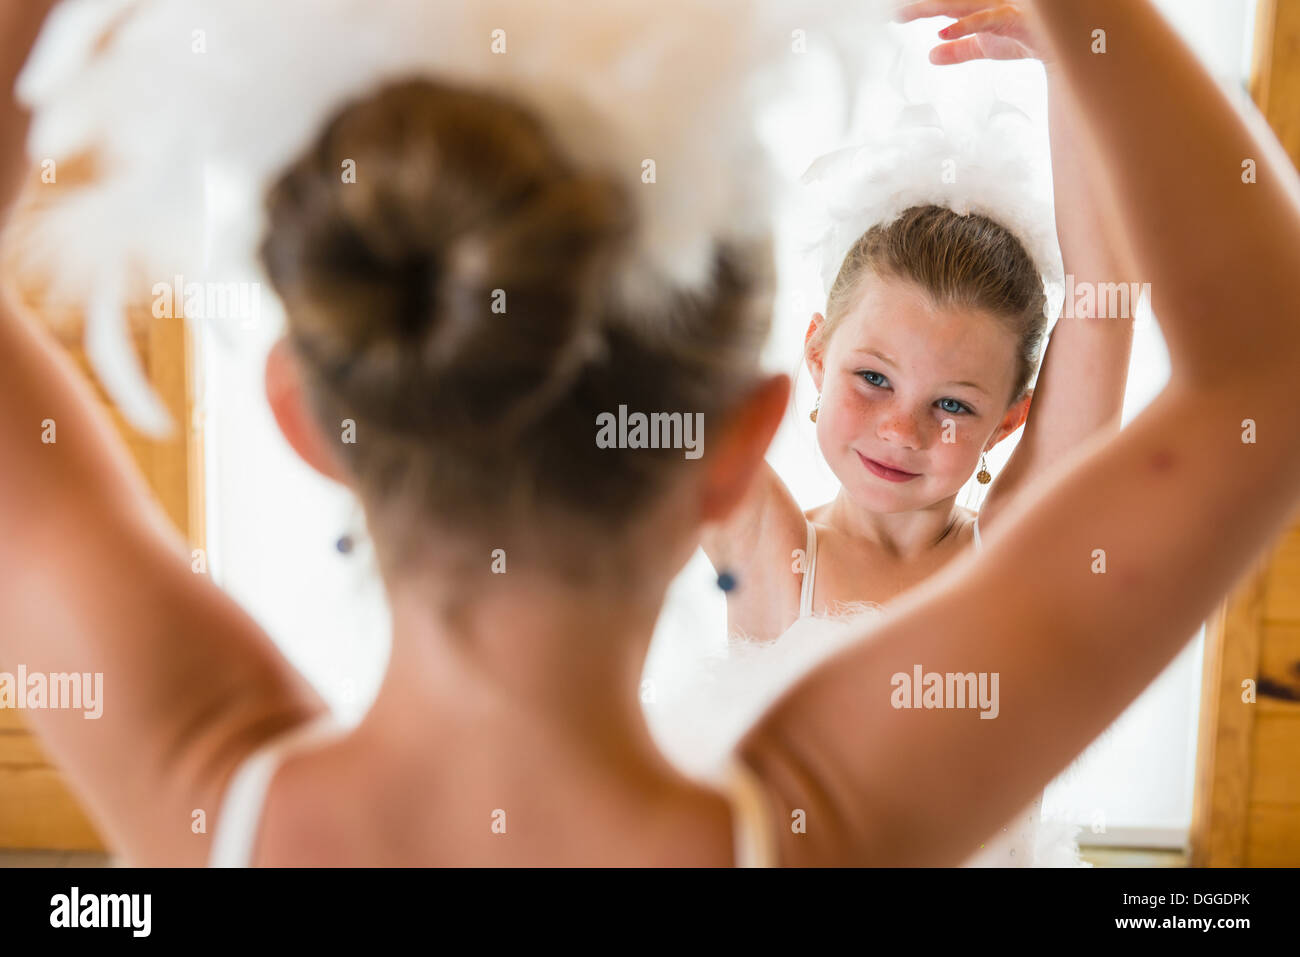 Ballerinas practising together, close up Stock Photo